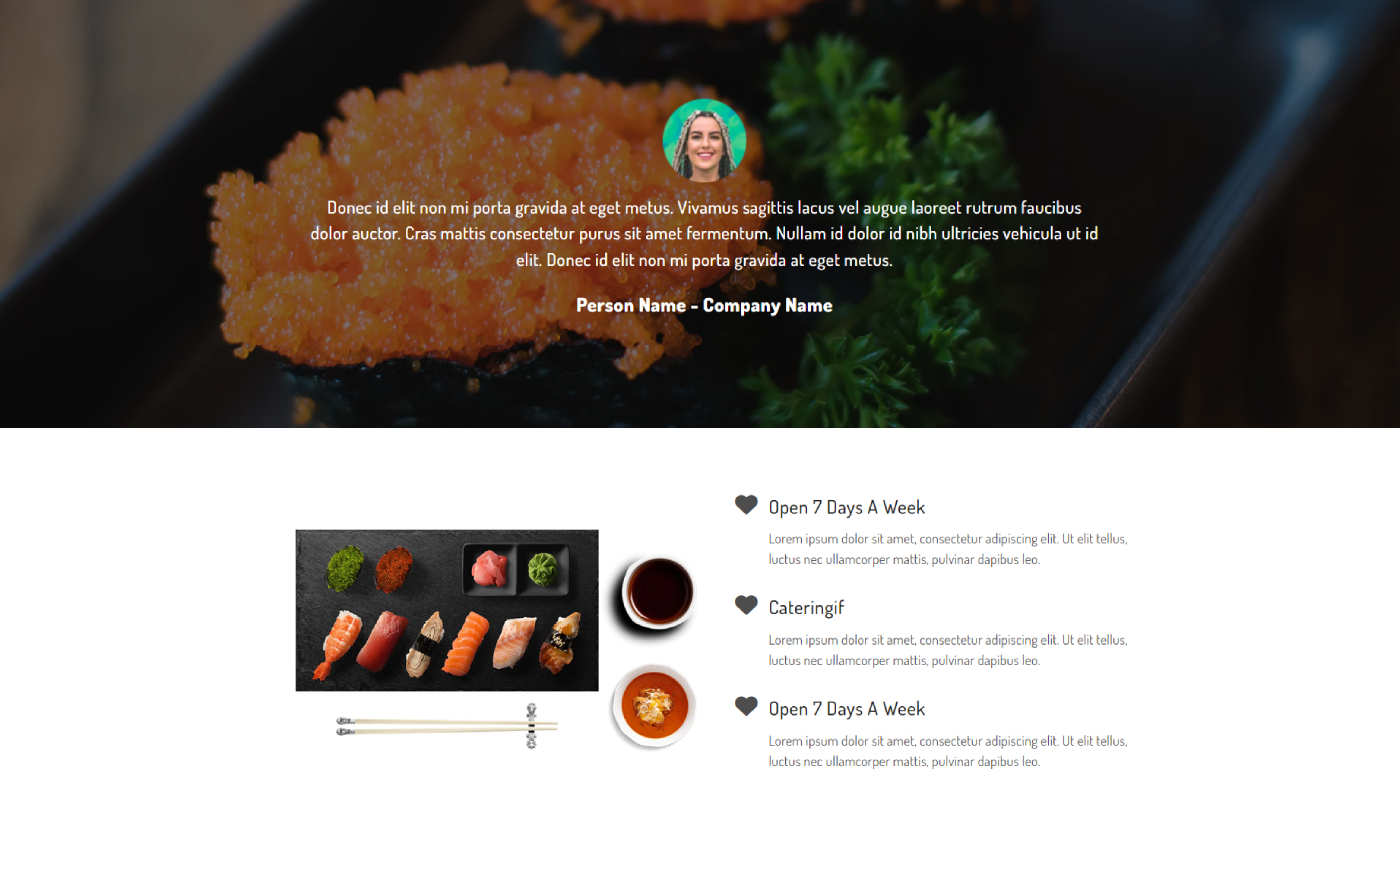 Desushify - Food & Restaurant Shopify template built by Pagefly